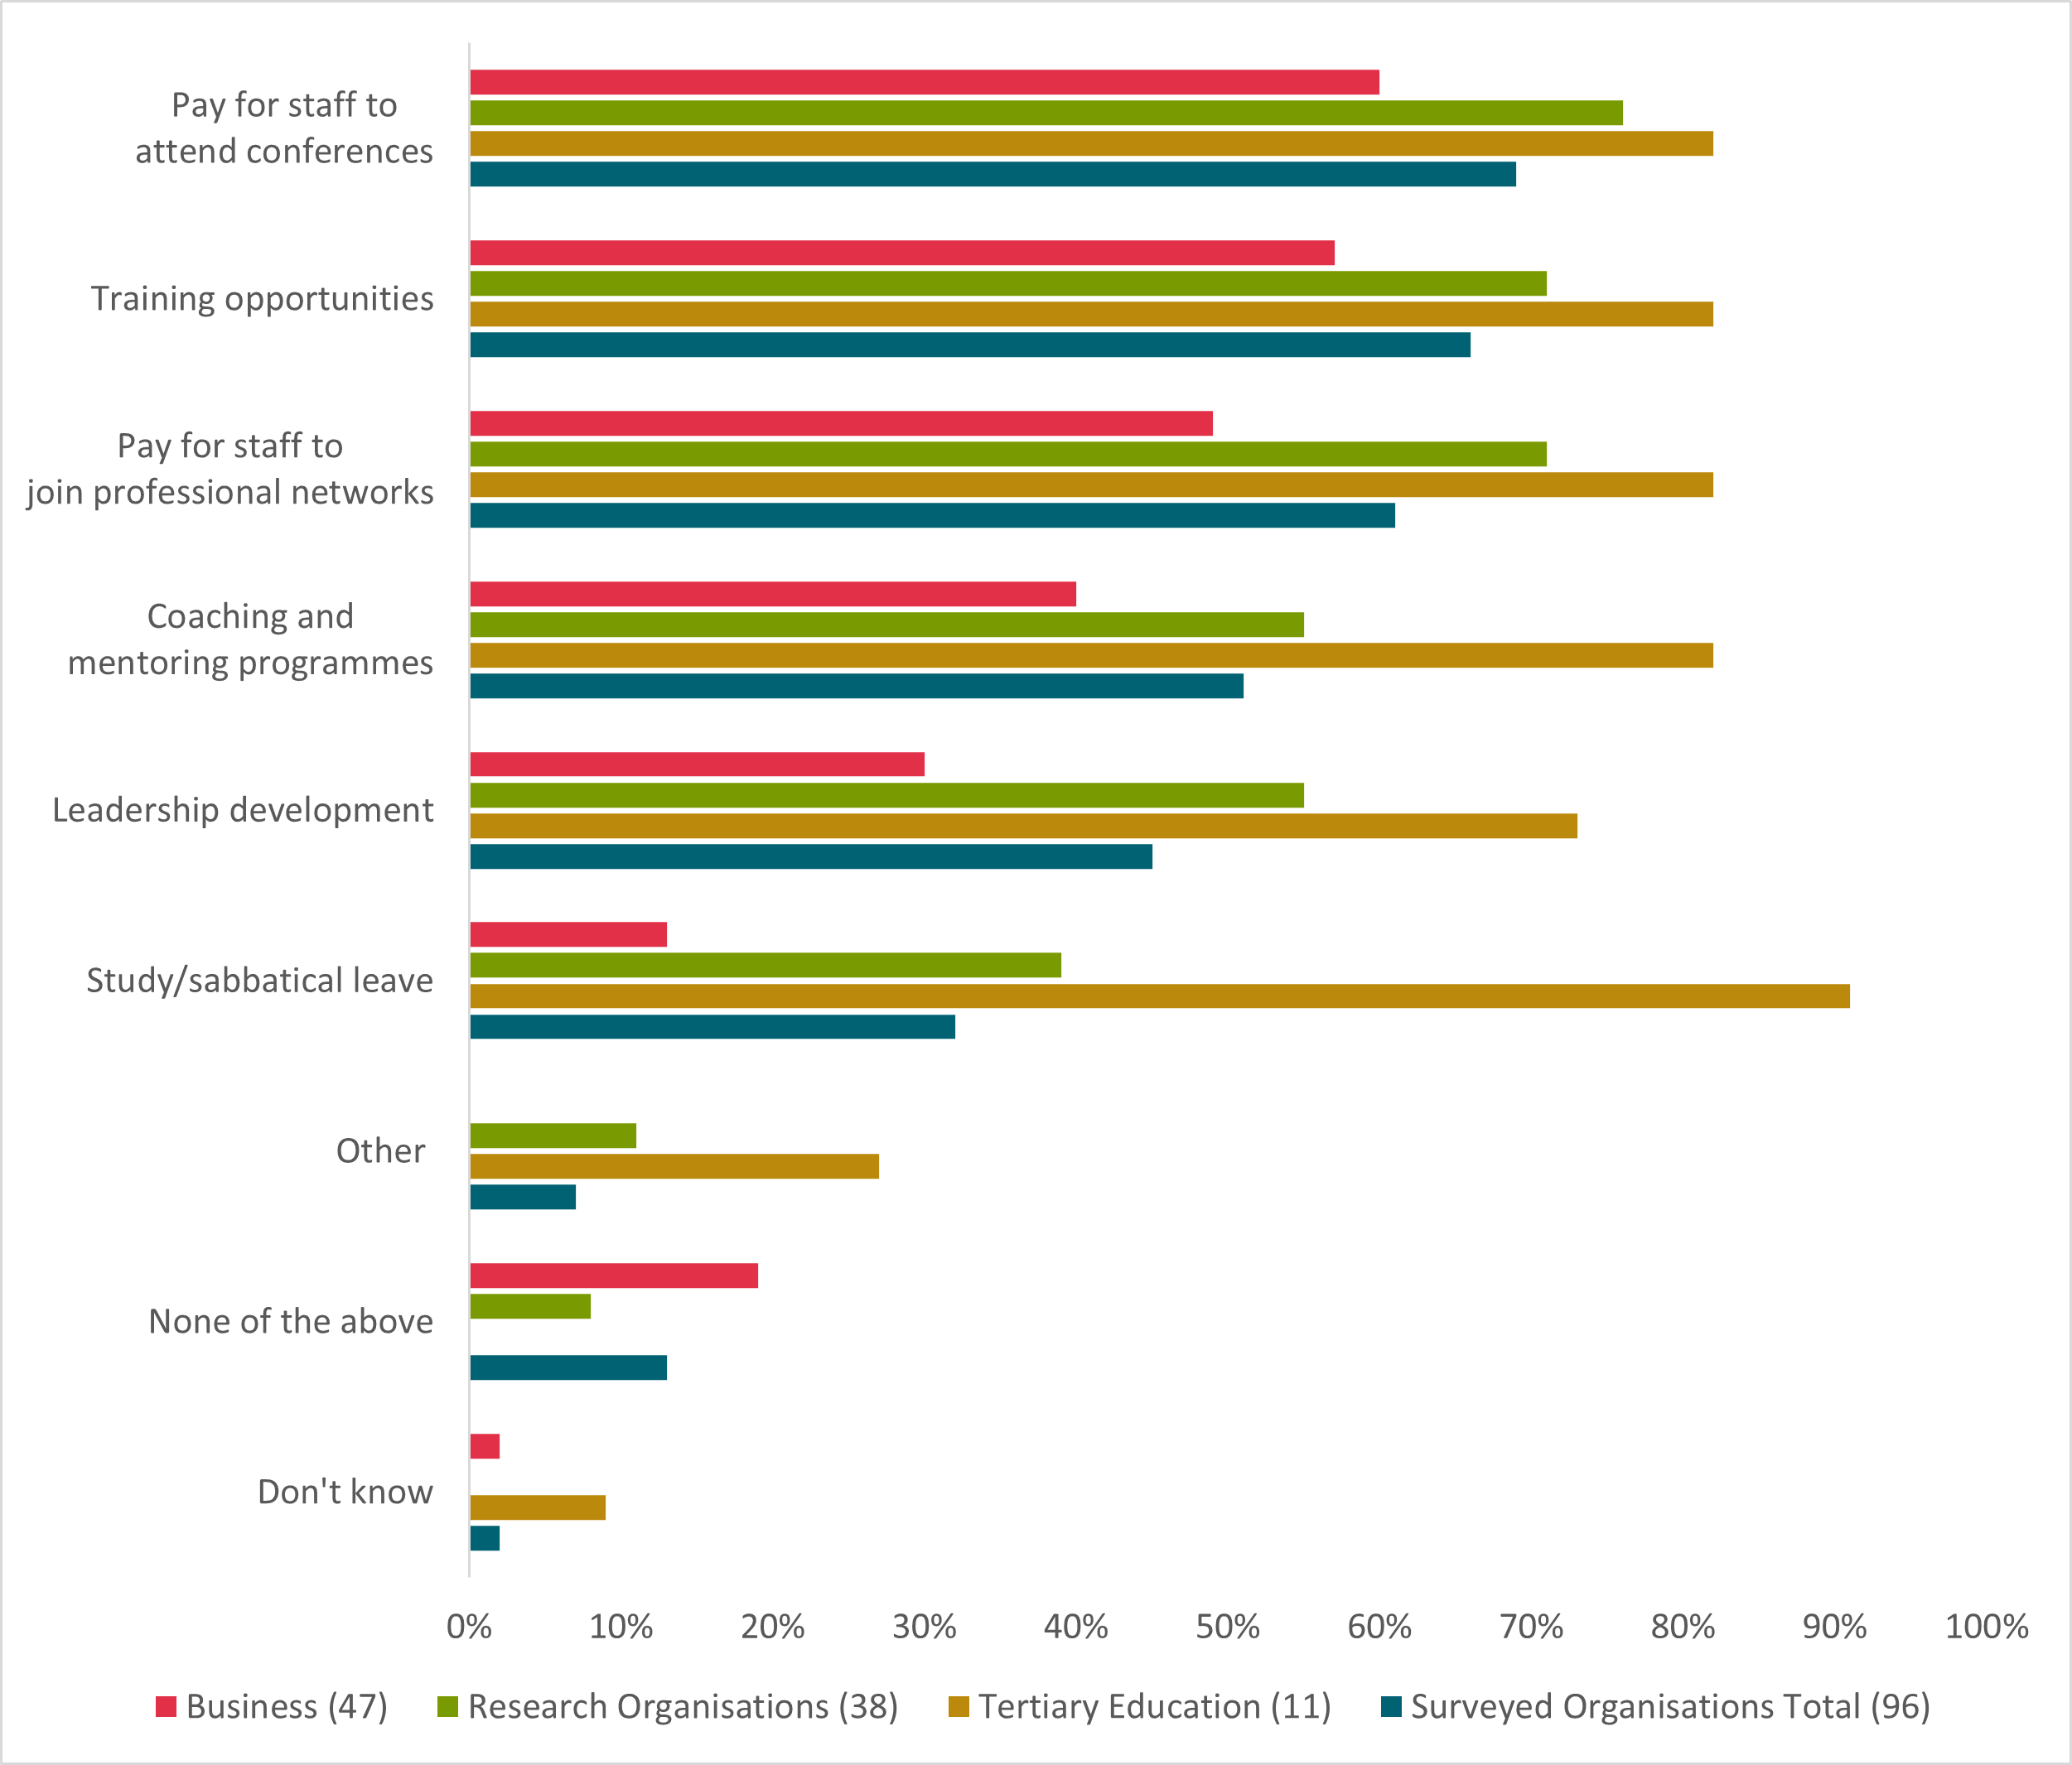 This figure is a clustered bar chart showing the types of professional development support available for Research, Science and Innovation employees. The chart has 9 clusters representing the professional development support types (Pay for staff to attend conferences, Training opportunities, Pay for staff to join professional ne2rks, Coaching and mentoring programmes, Leadership development, Study/sabbatical leave, Other, None of the above, Don't know). Each cluster has 4 bars representing each organisation type (Business, Research Organisations, Tertiary Education, Surveyed Organisations Total). The X axis shows the percentage of organisations that provide this type of professional development support, and the Y axis shows the type of professional development support by organisation. There is a key at the bottom of the chart showing the 4 organisation types.